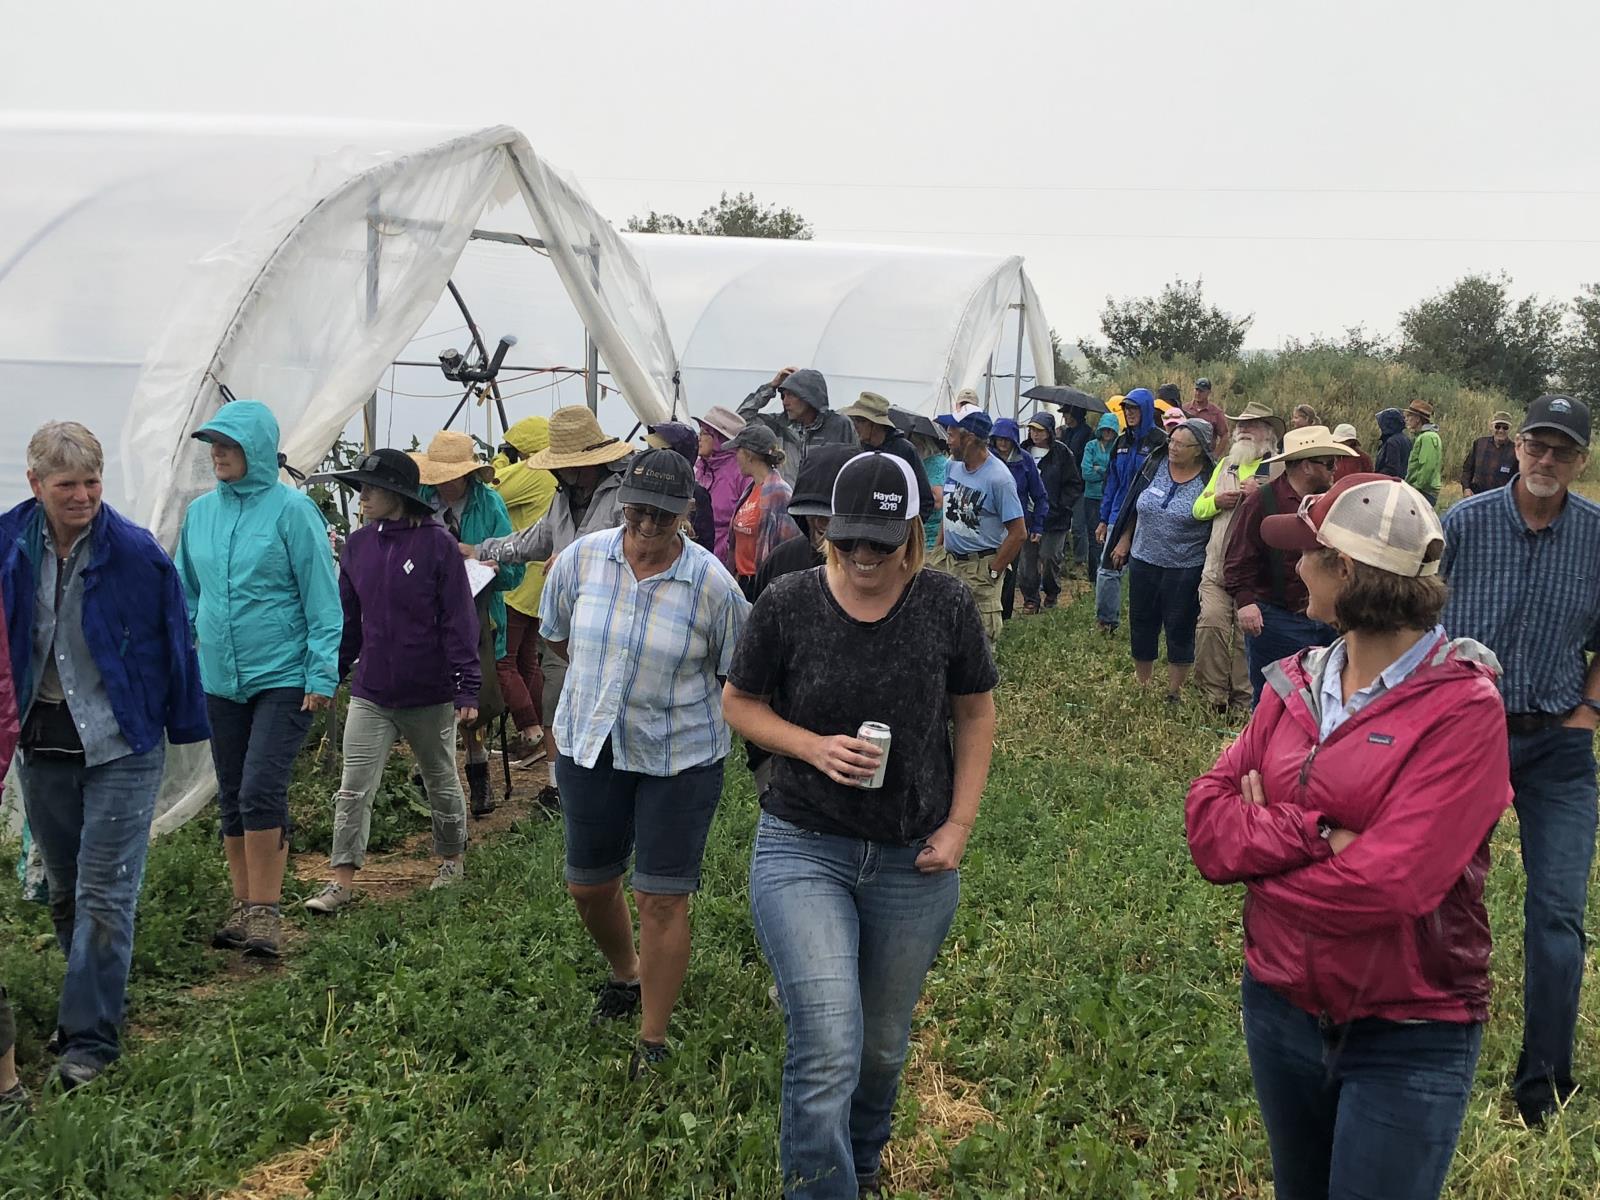 Teton County residents visit an organic farm Aug. 8 during the Teton Farm & Agricultural Tour, which showed community members how farmers, ranchers and conservation groups are working together on natural-resource related projects that benefit the soil and water.